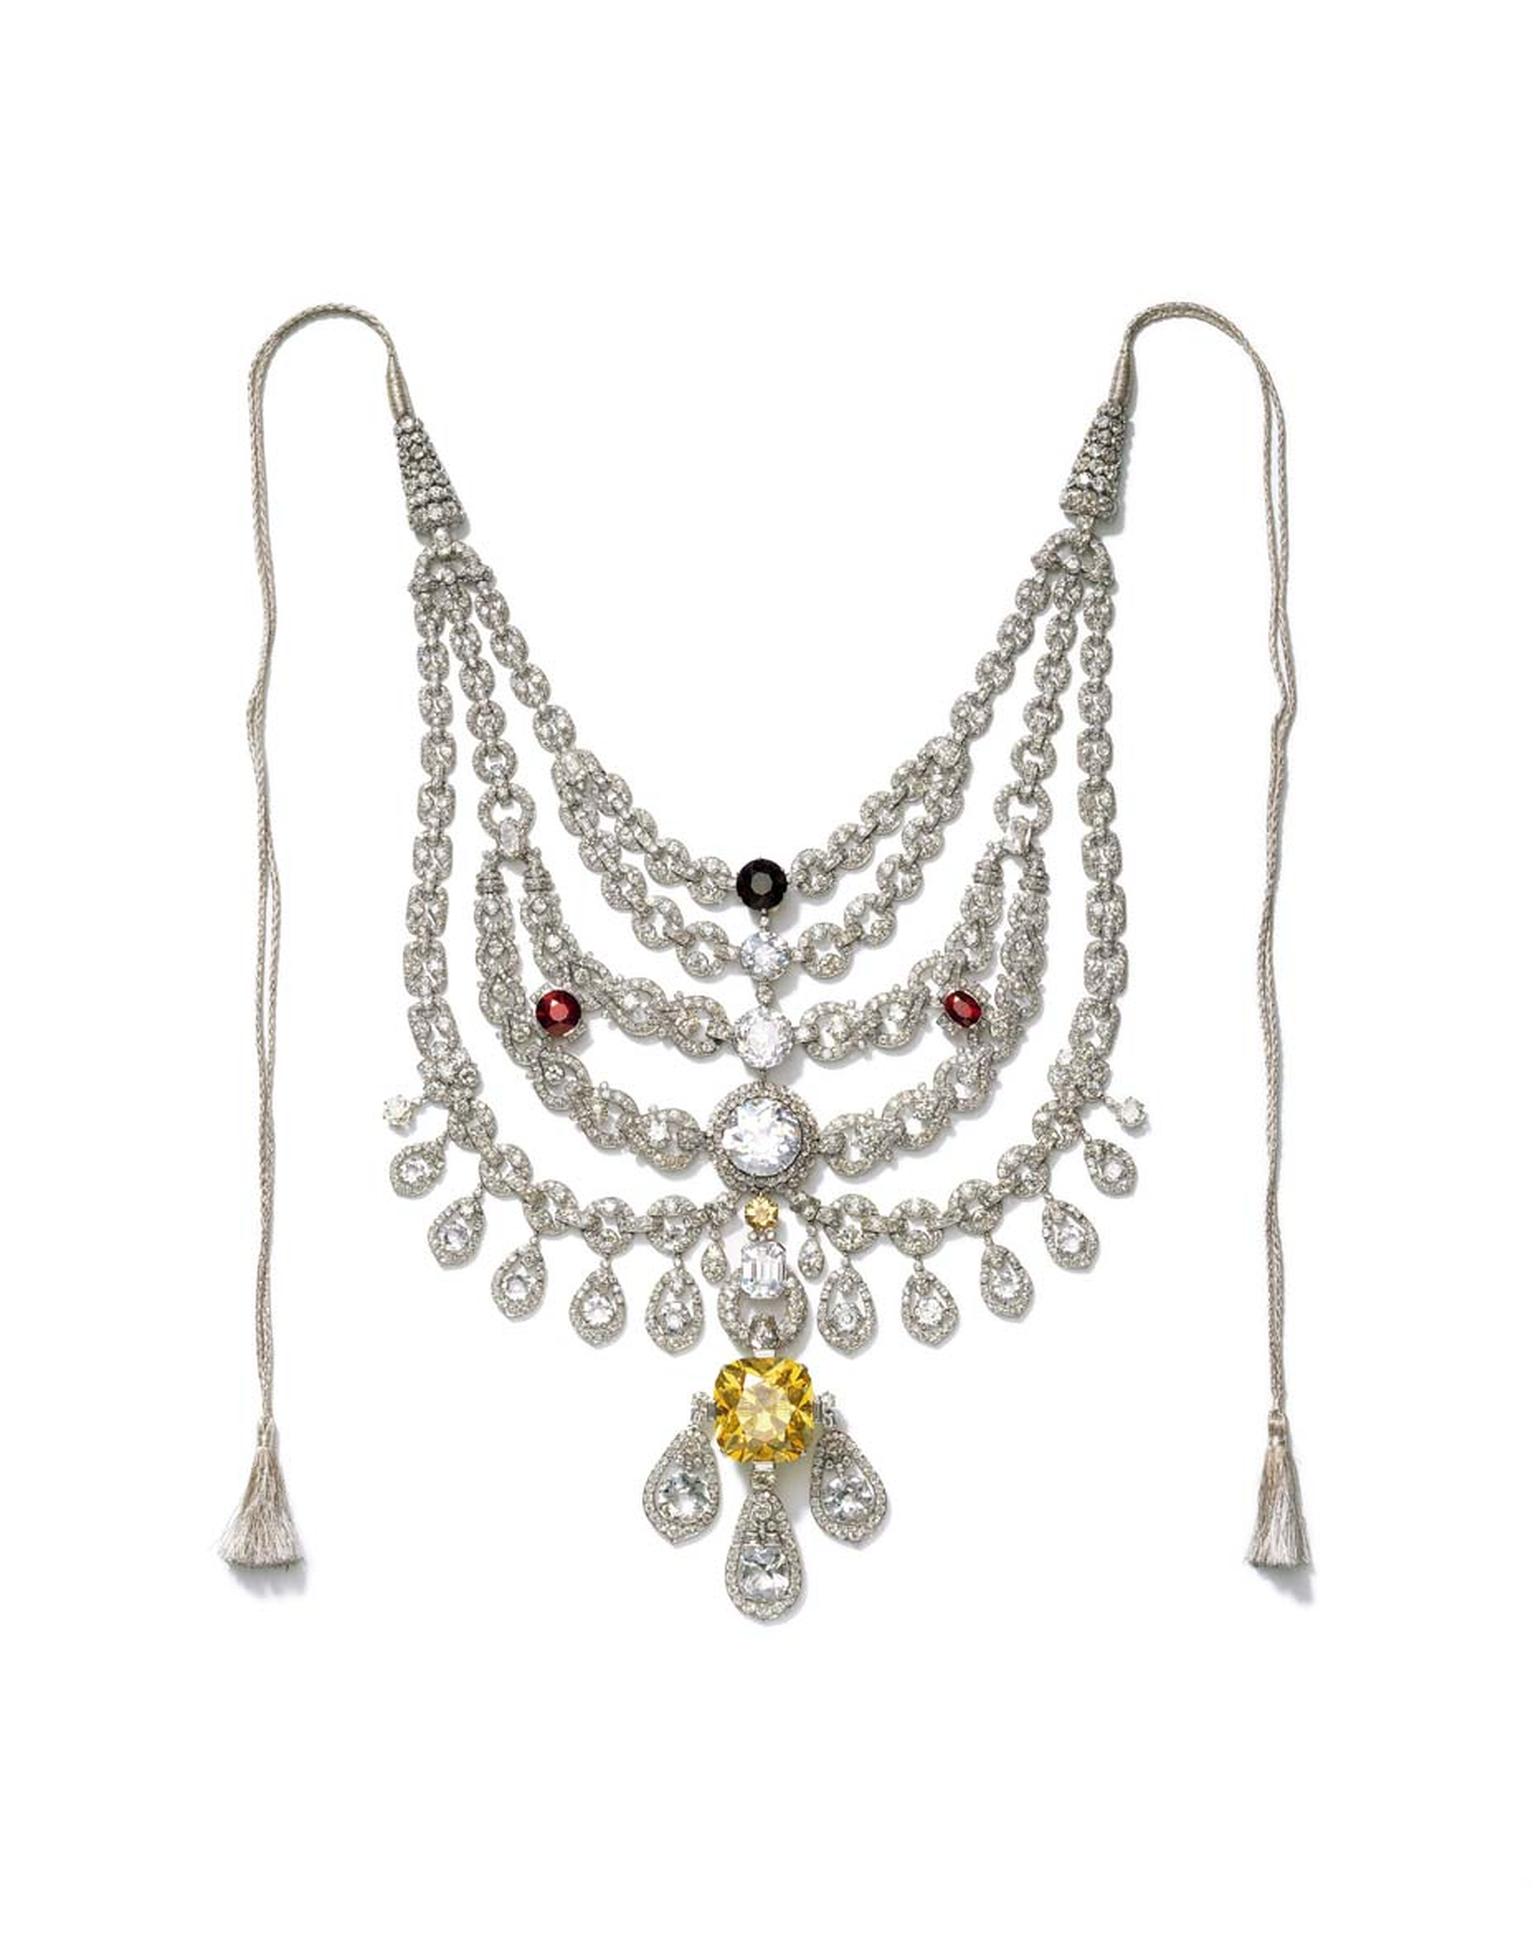 Created as a one-of-a-kind ceremonial piece for Sir Bhupindar Singh, the Maharaja of Patiala, in 1928, this Cartier necklace was originally set with an outstanding 2,930 diamonds.